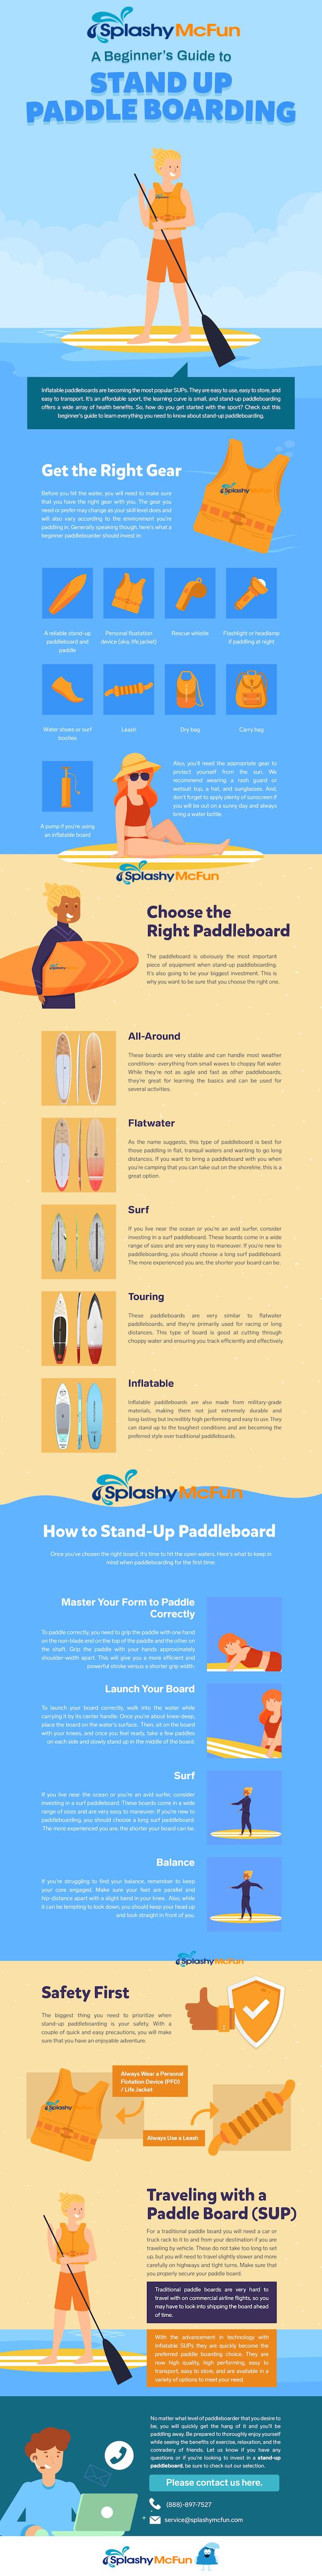 Stand Up Paddle Boarding Beginners Guide Infographic. Details on how get started at paddle boarding. Color scheme is tan and blue, similar to the sky and beach.